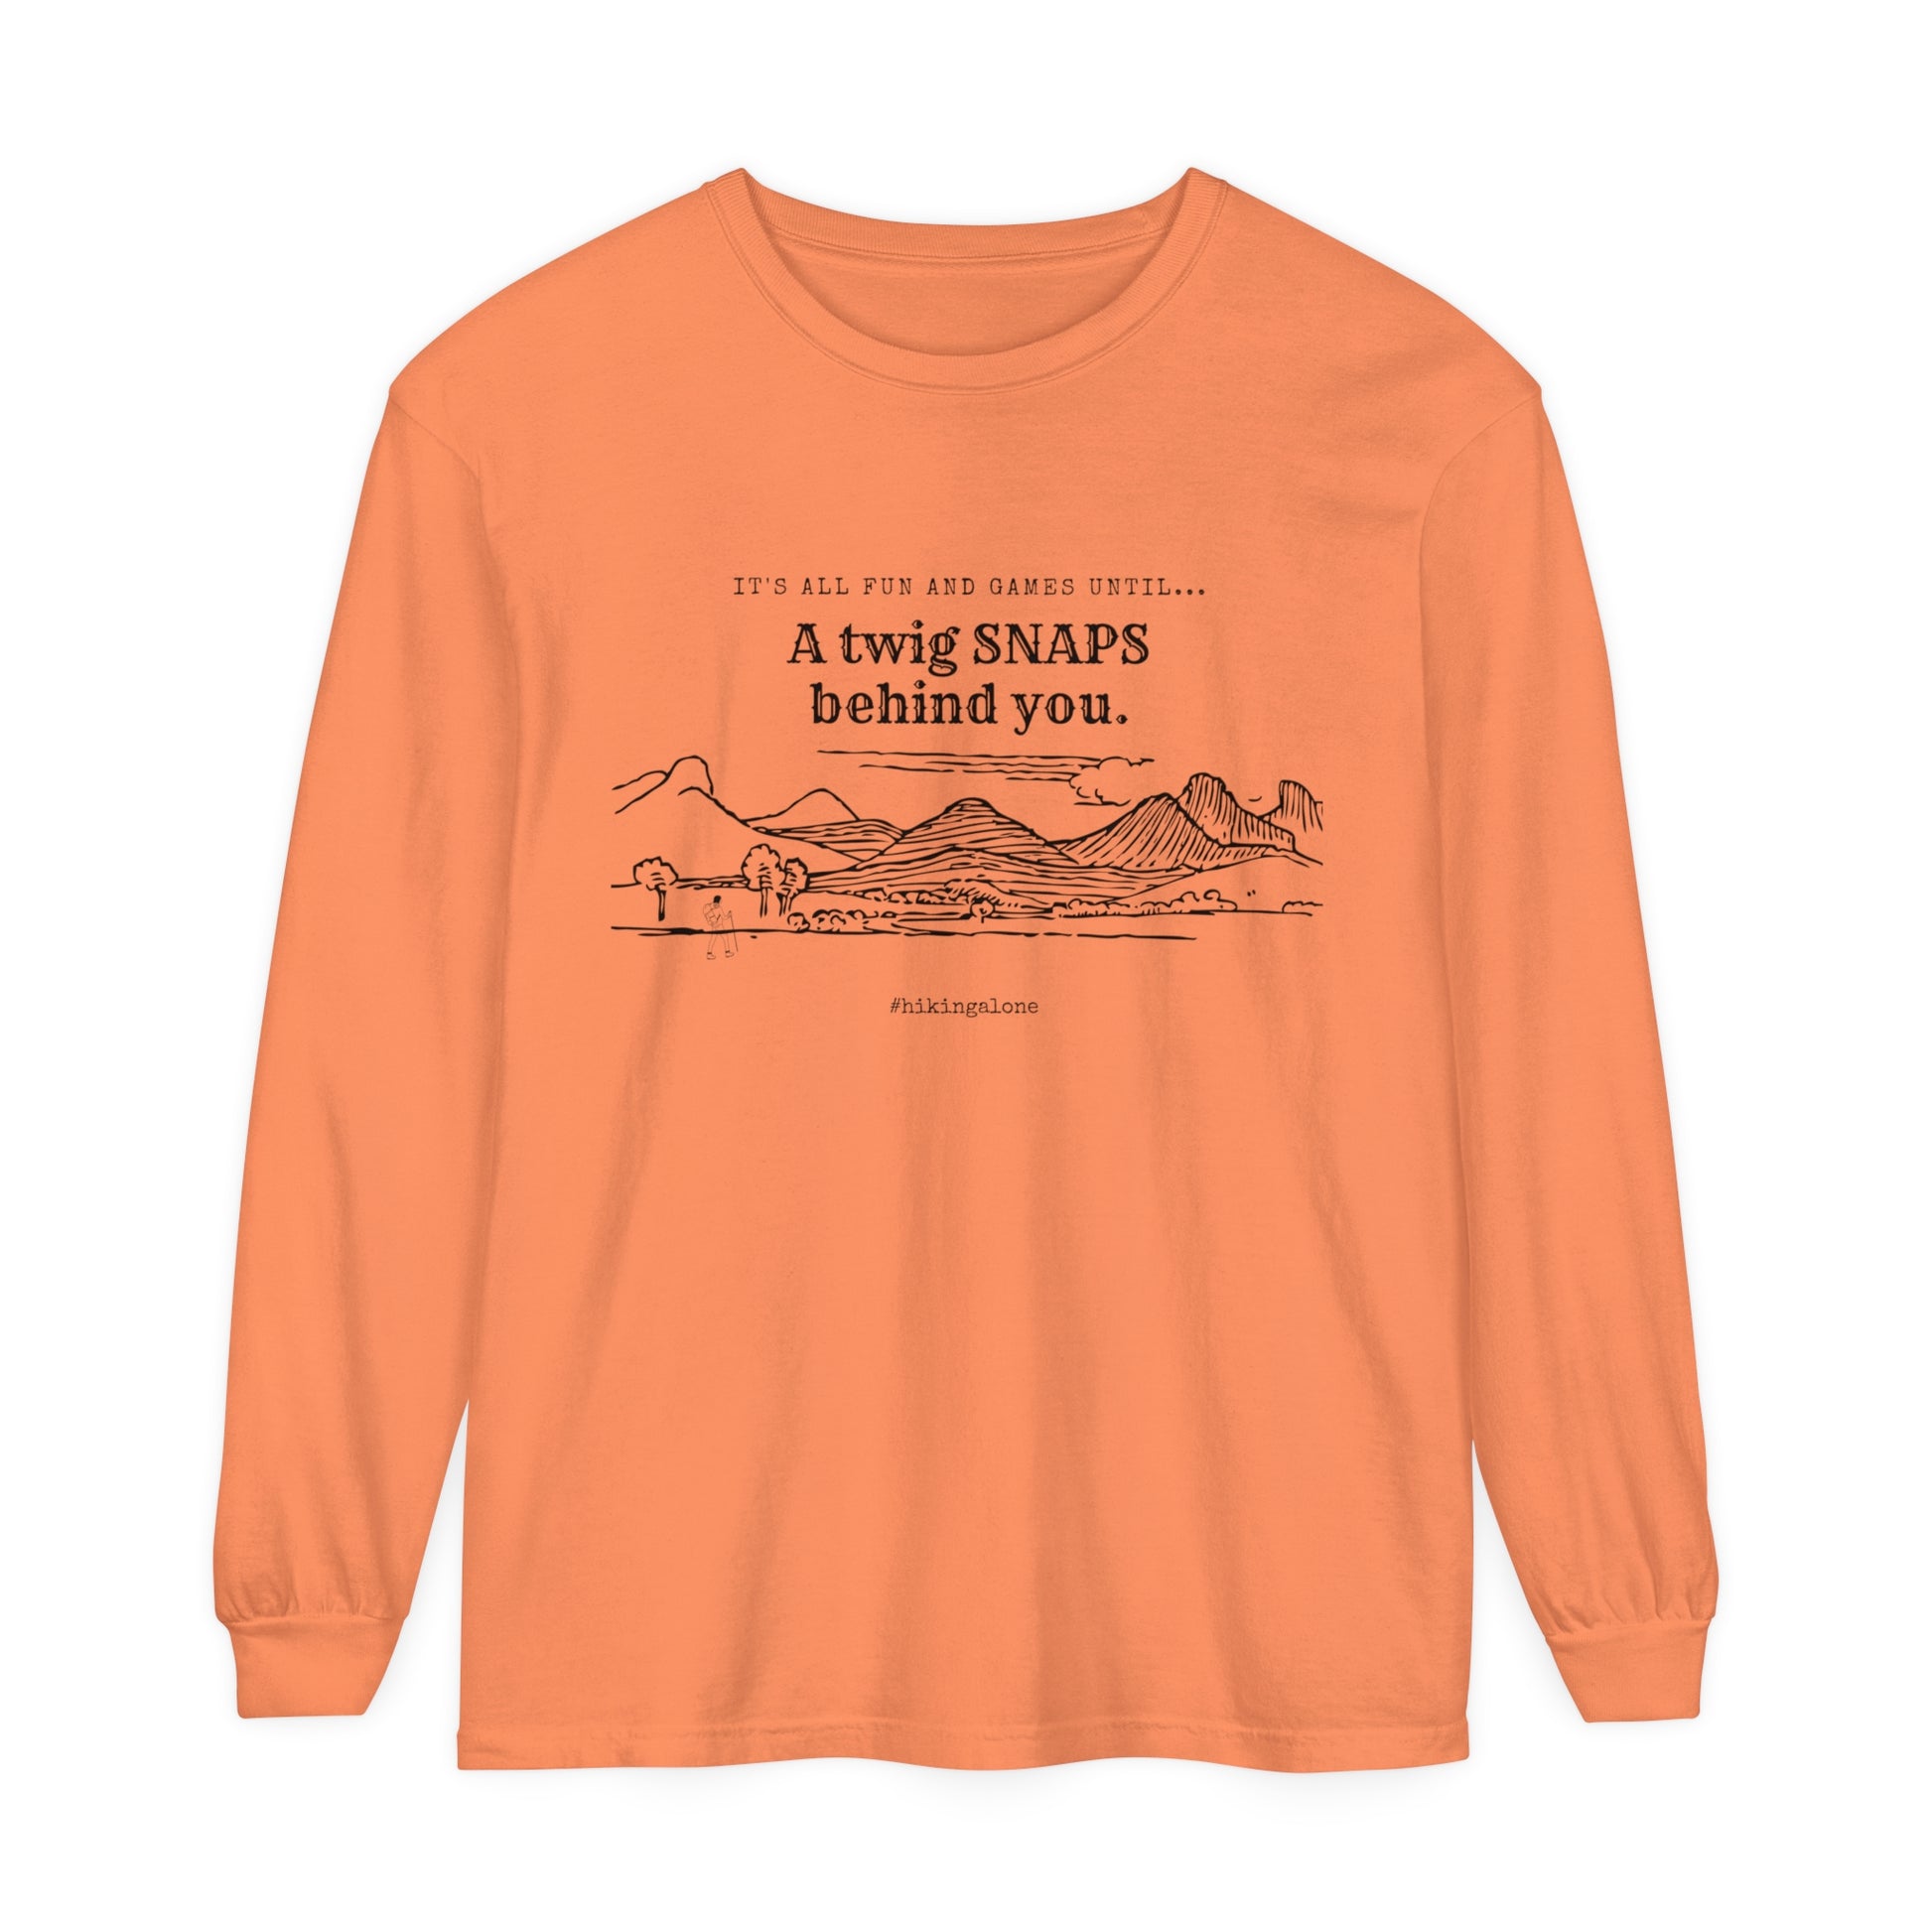 It's all fun and games until a twig snaps behind you, Mountain Explorer Long Sleeve Tee, True Crime Inspired Hiking Shirt, Comfy Comfort Colors, Solo Hiker Design, Hiking Alone Unisex Garment-dyed Long Sleeve T-Shirt, Funny shirts for hiking, shirts for hikers, Funny shirts for solo hikers, Solo hiking shirt